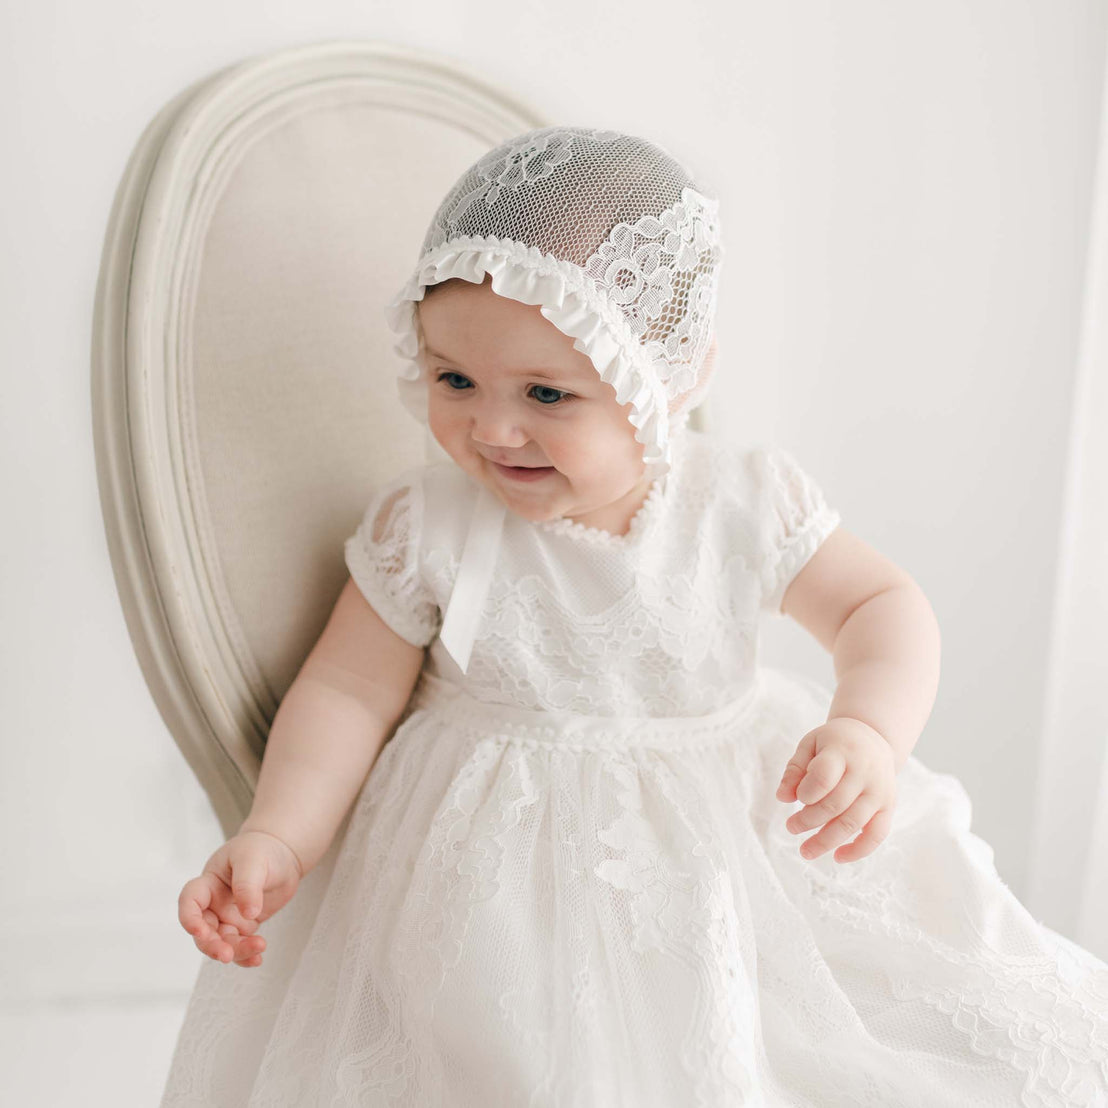 A baby wearing a white, embroidered lace Victoria Puff Sleeve Christening Gown & Bonnet sits on a cream-colored chair. The child is facing slightly to the left and appears to be smiling. The background is white and simple.